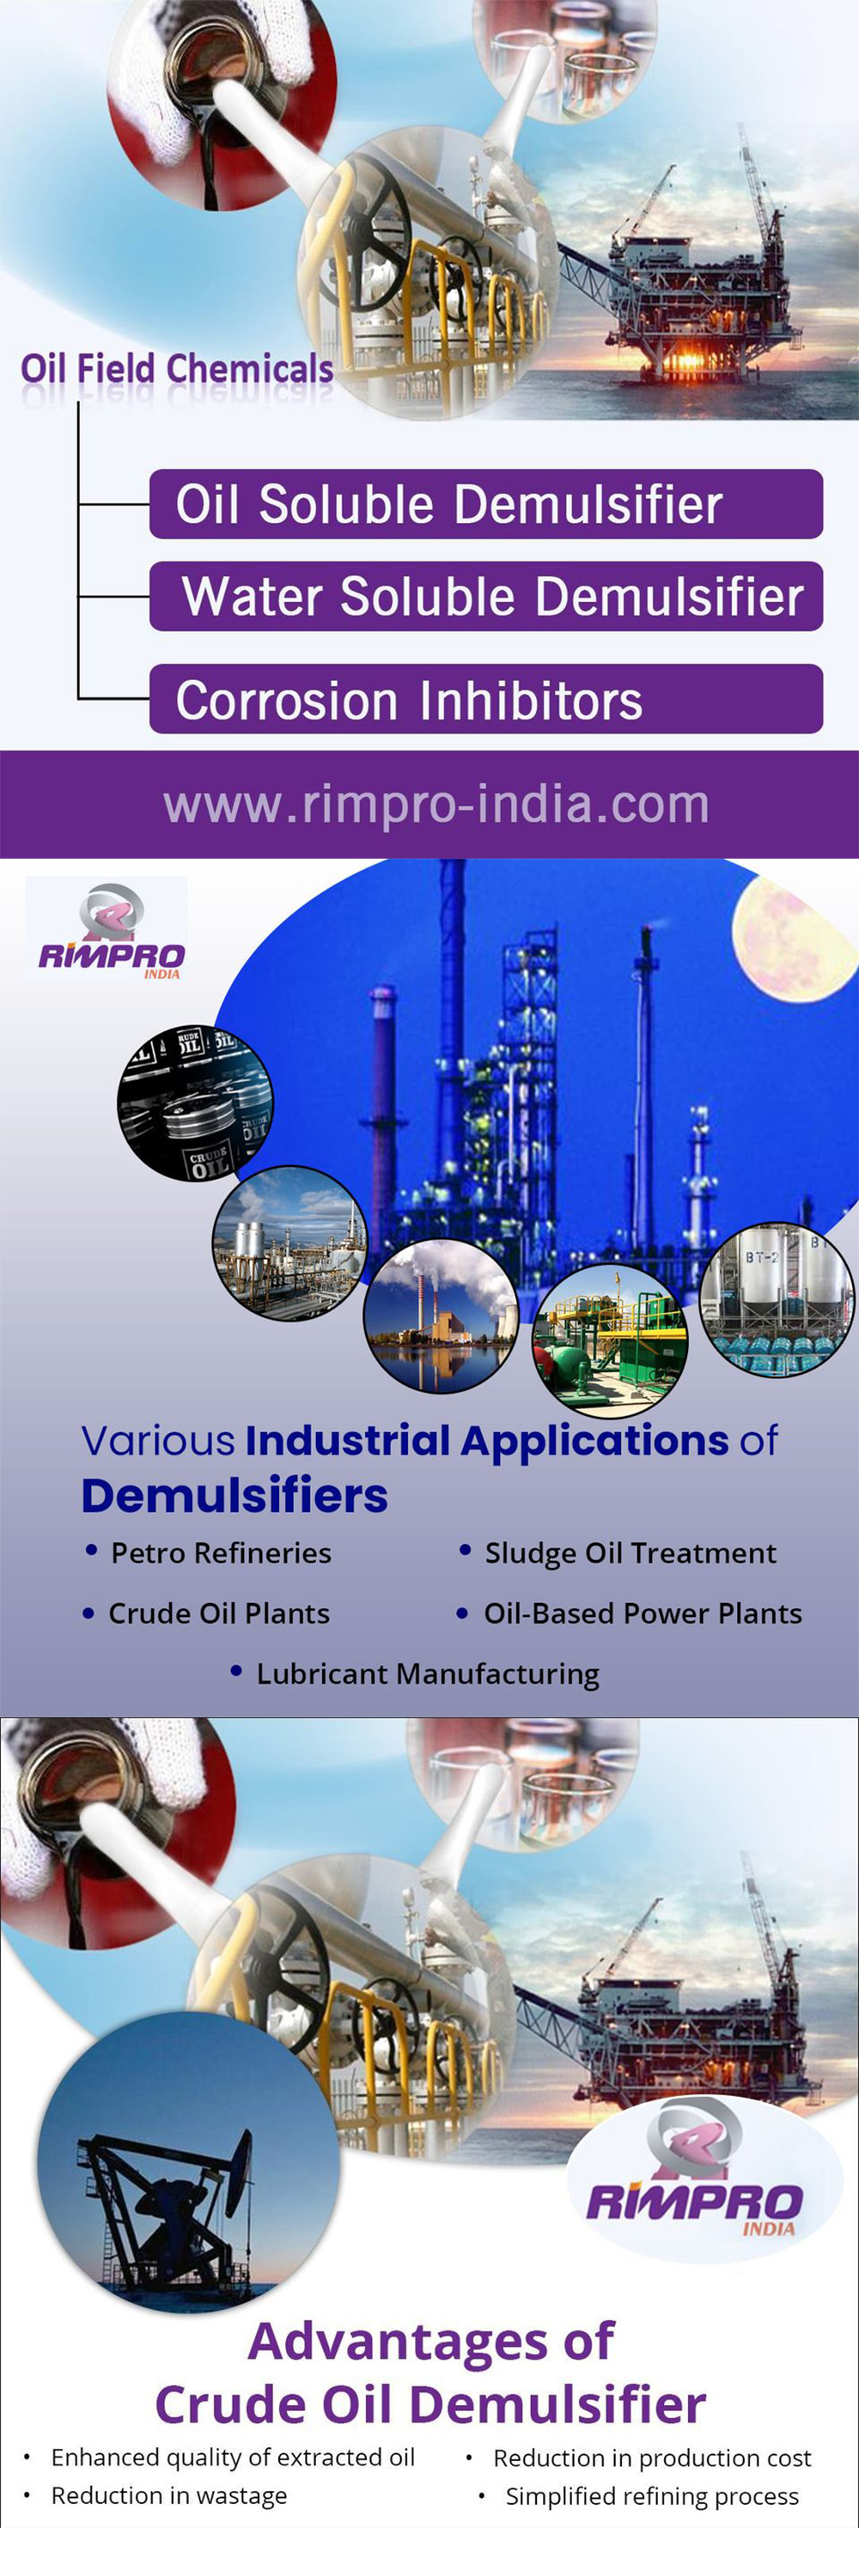 How Demulsifiers Are A Boon To Oil Refineries?